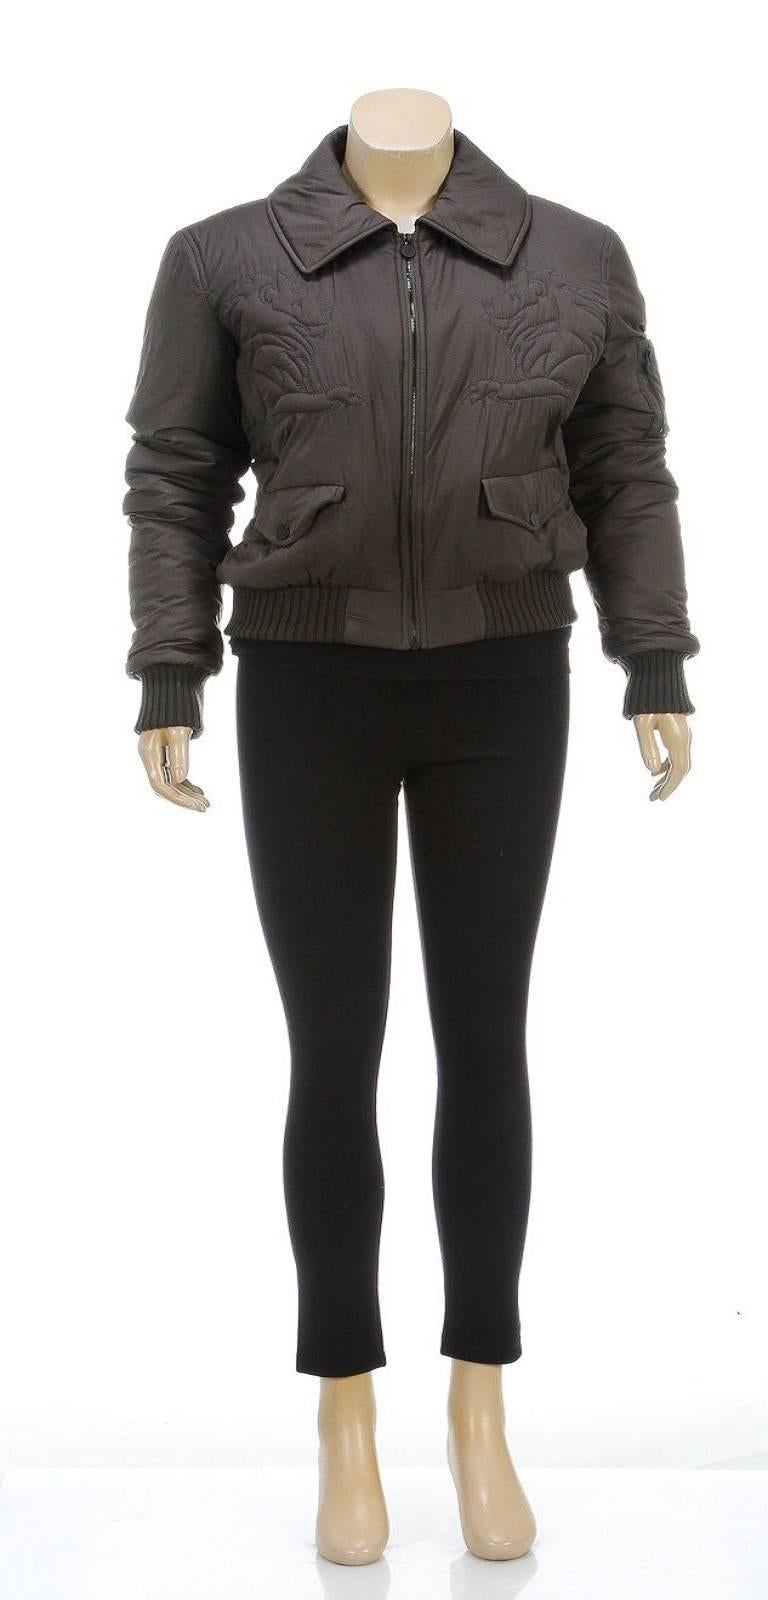 Featured here is a beautifully made Chanel jacket to give your look an extra flash of fashion! This super soft jacket contains ribbed contrasts at the  hemline and cuffs. It zips up the front as two flap pockets snap closed in the front. A CC is